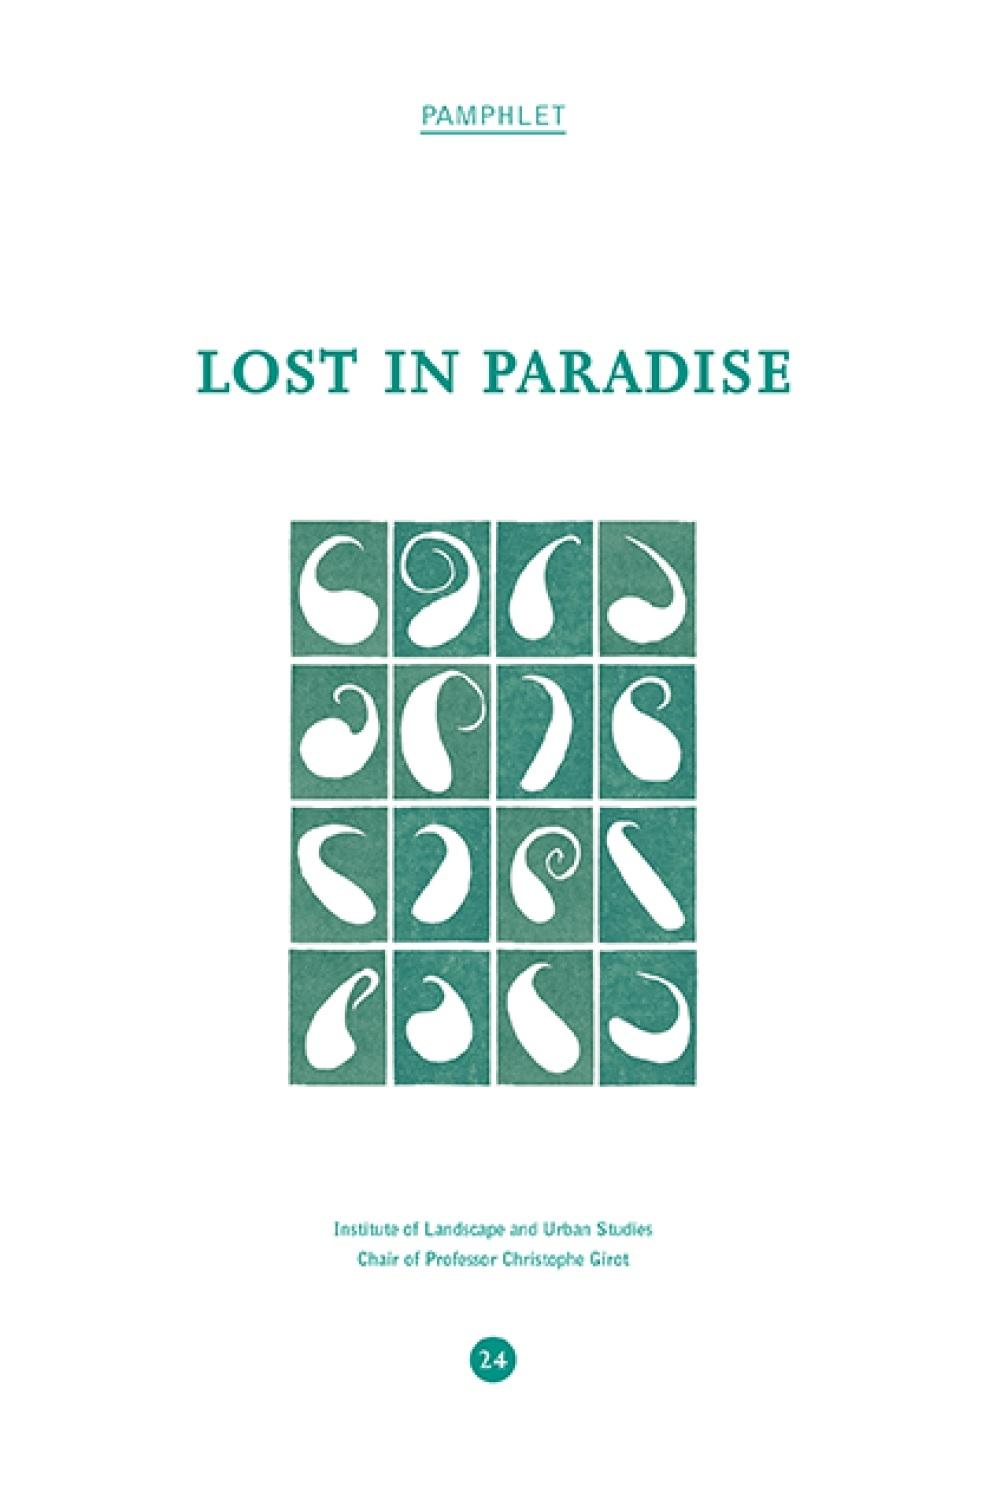 PAMPHLET 24: LOST IN PARADISE, A JOURNEY THROUGH THE PERSIAN LANDSCAPE. 